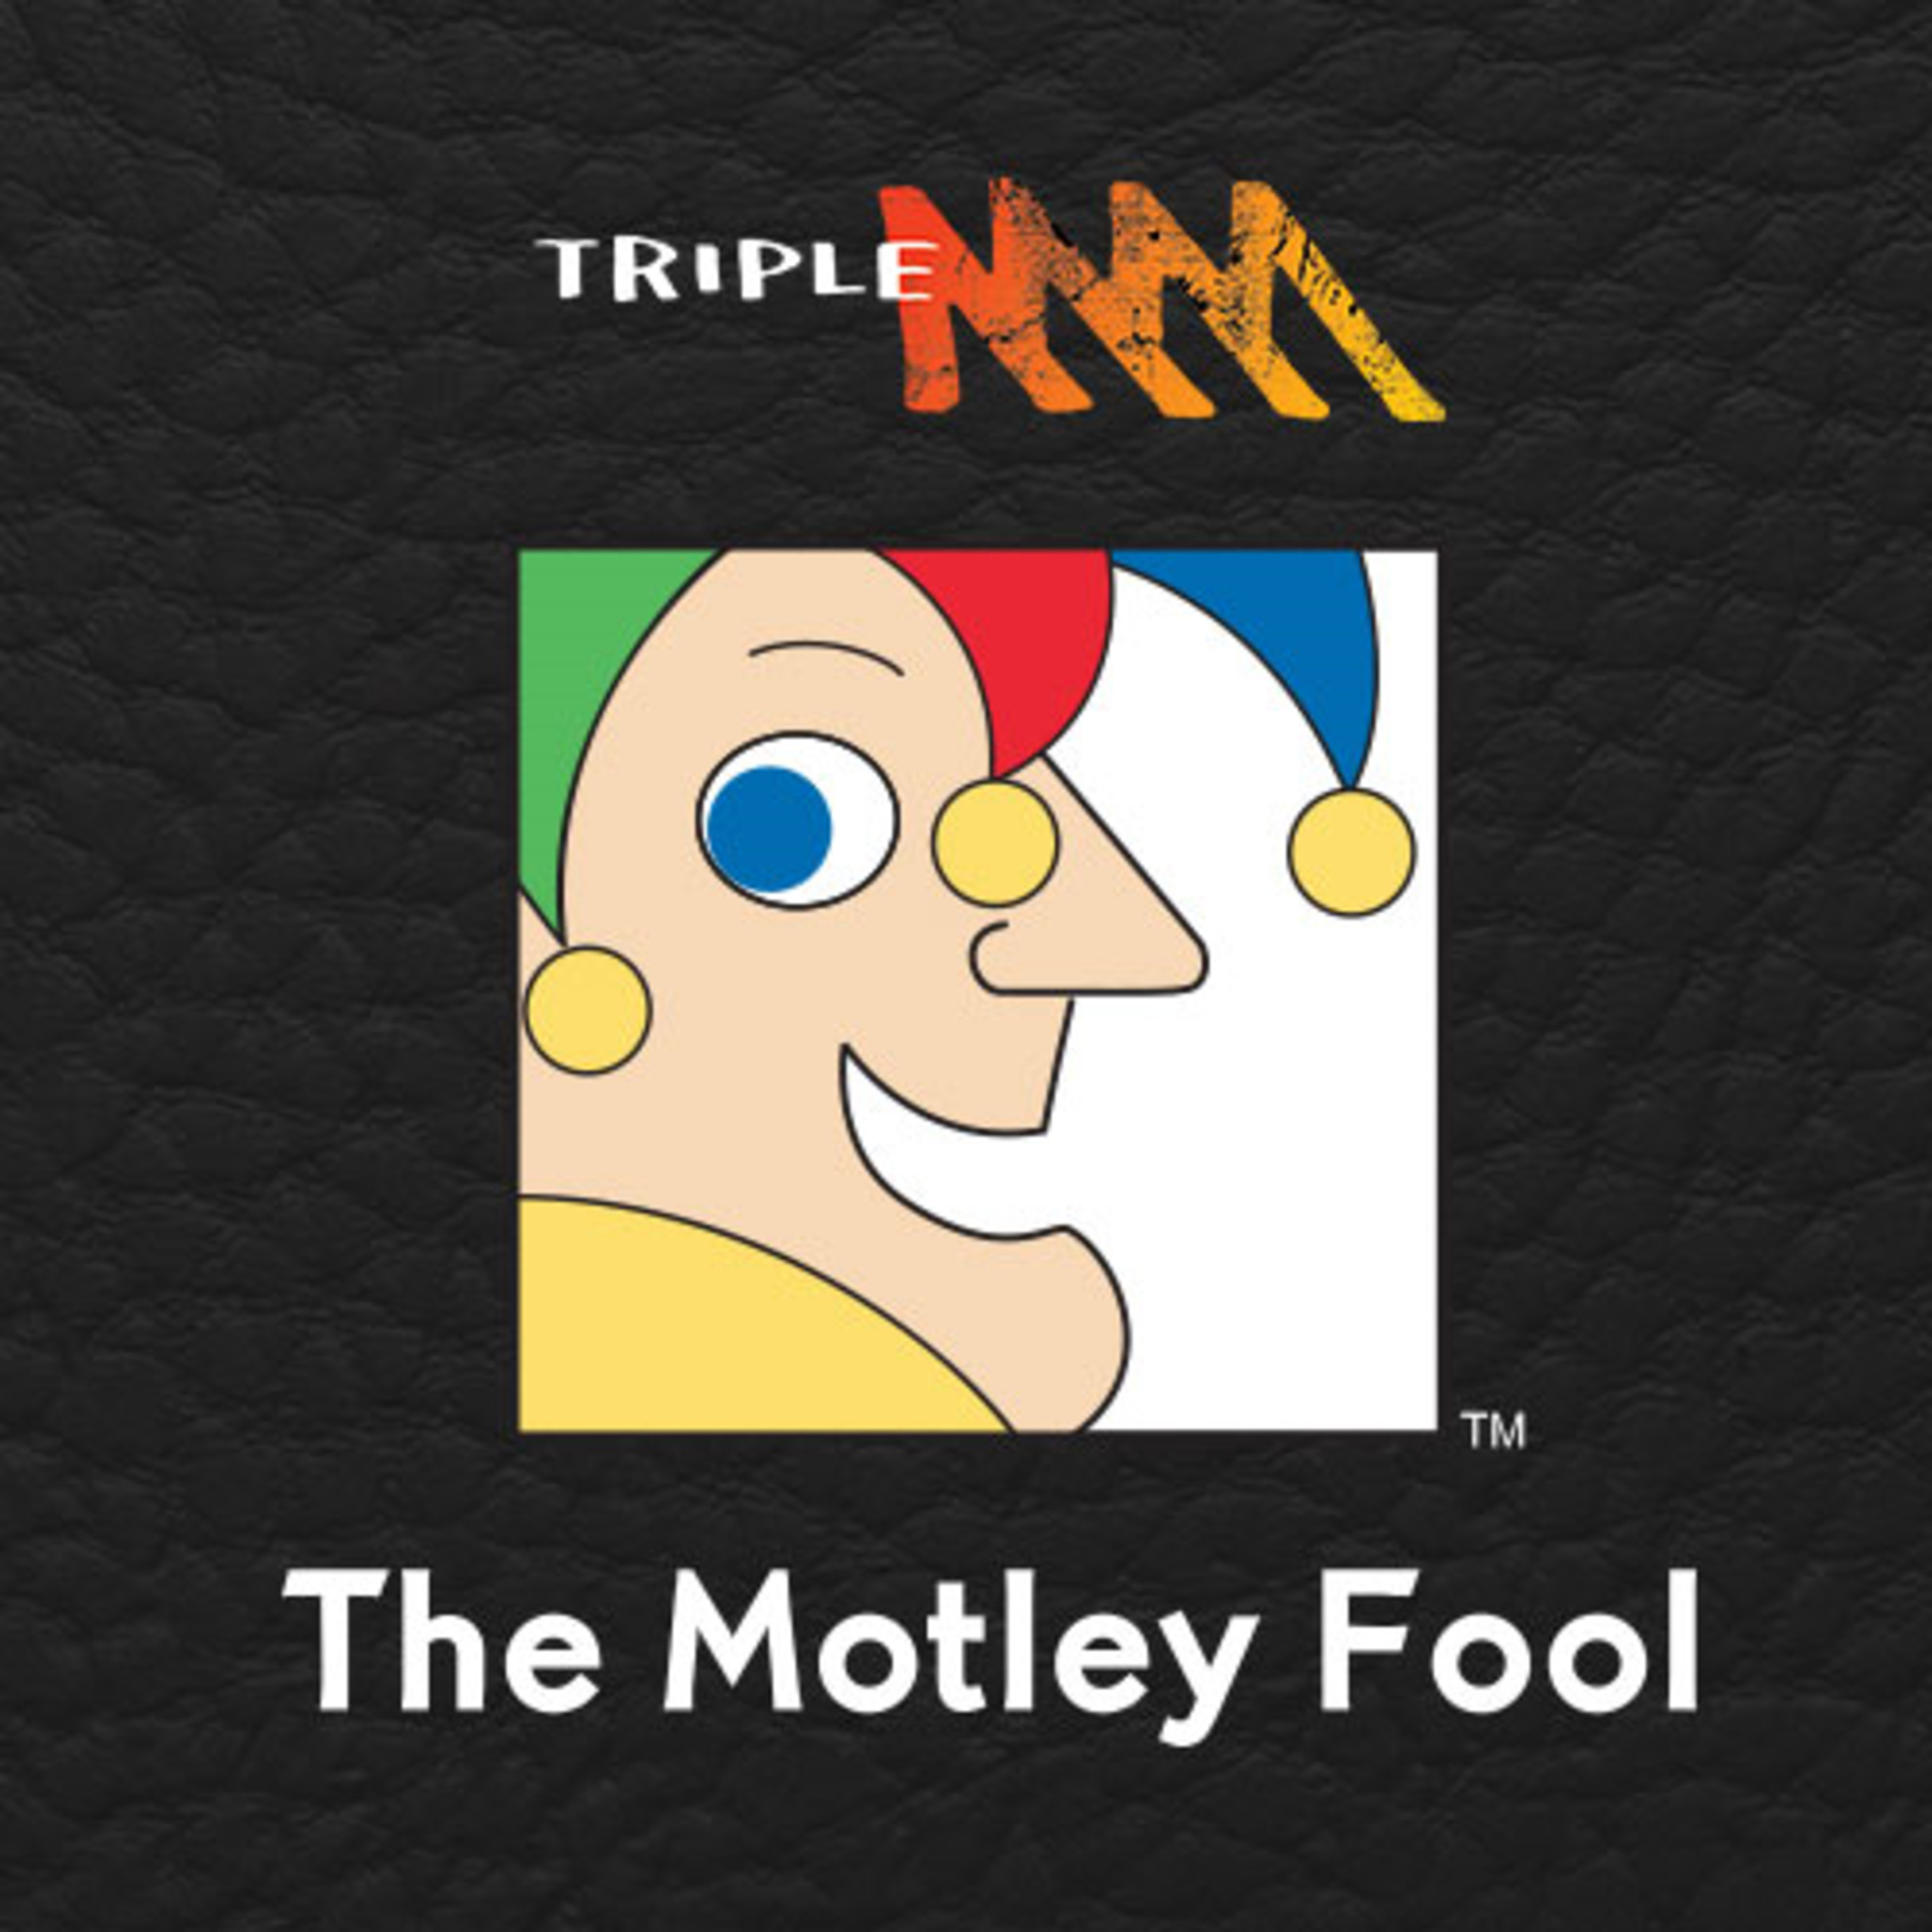 Another Supersized Foolish Mailbag - Triple M's Motley Fool Money